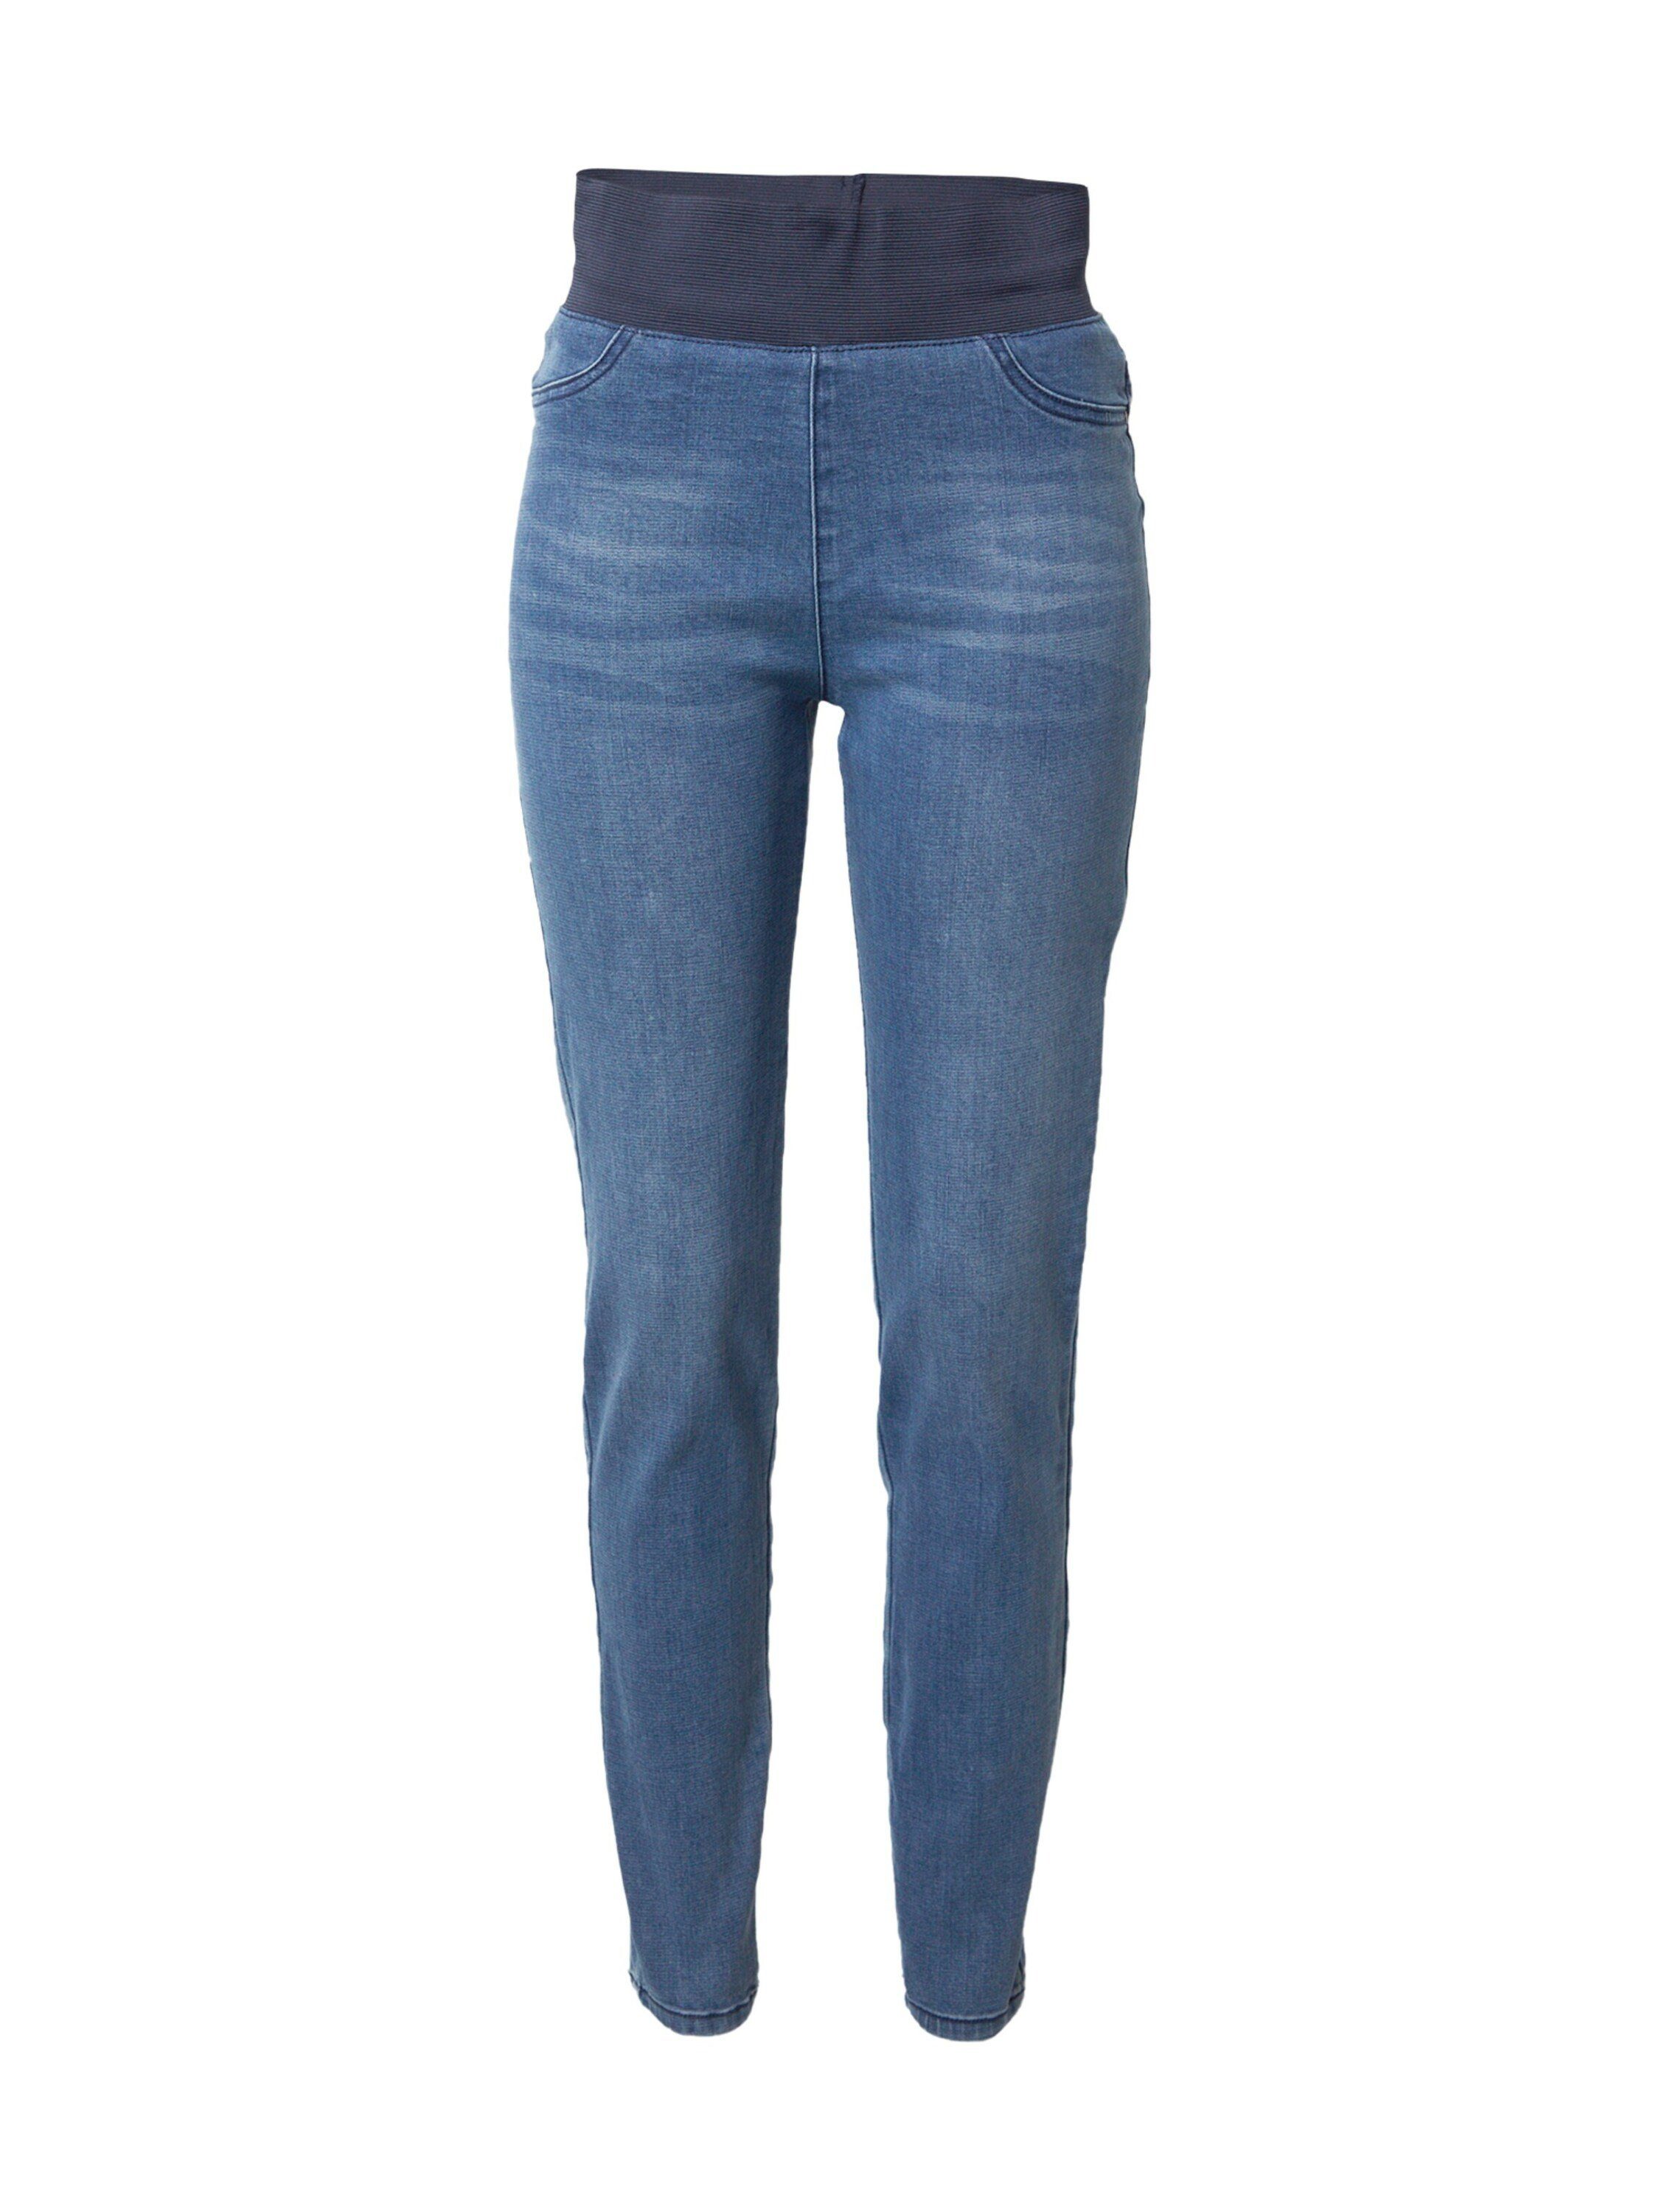 Weiteres Skinny-fit-Jeans Details FREEQUENT Shantal Detail, Plain/ohne (1-tlg)